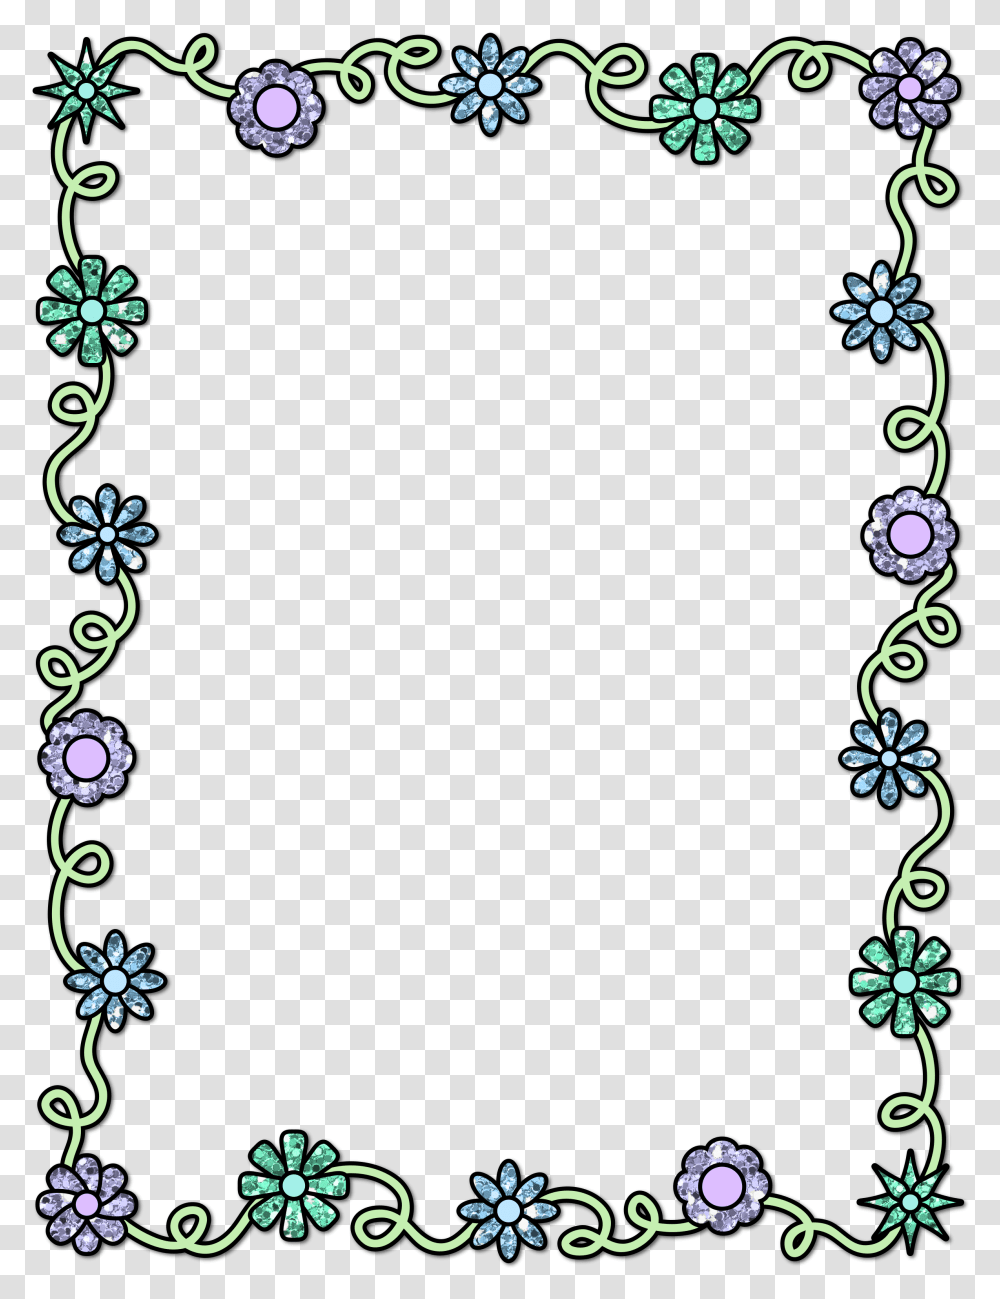 Royalty Free Stock Microsoft Techflourish Collections Border Flower Design Drawing, Floral Design, Pattern Transparent Png